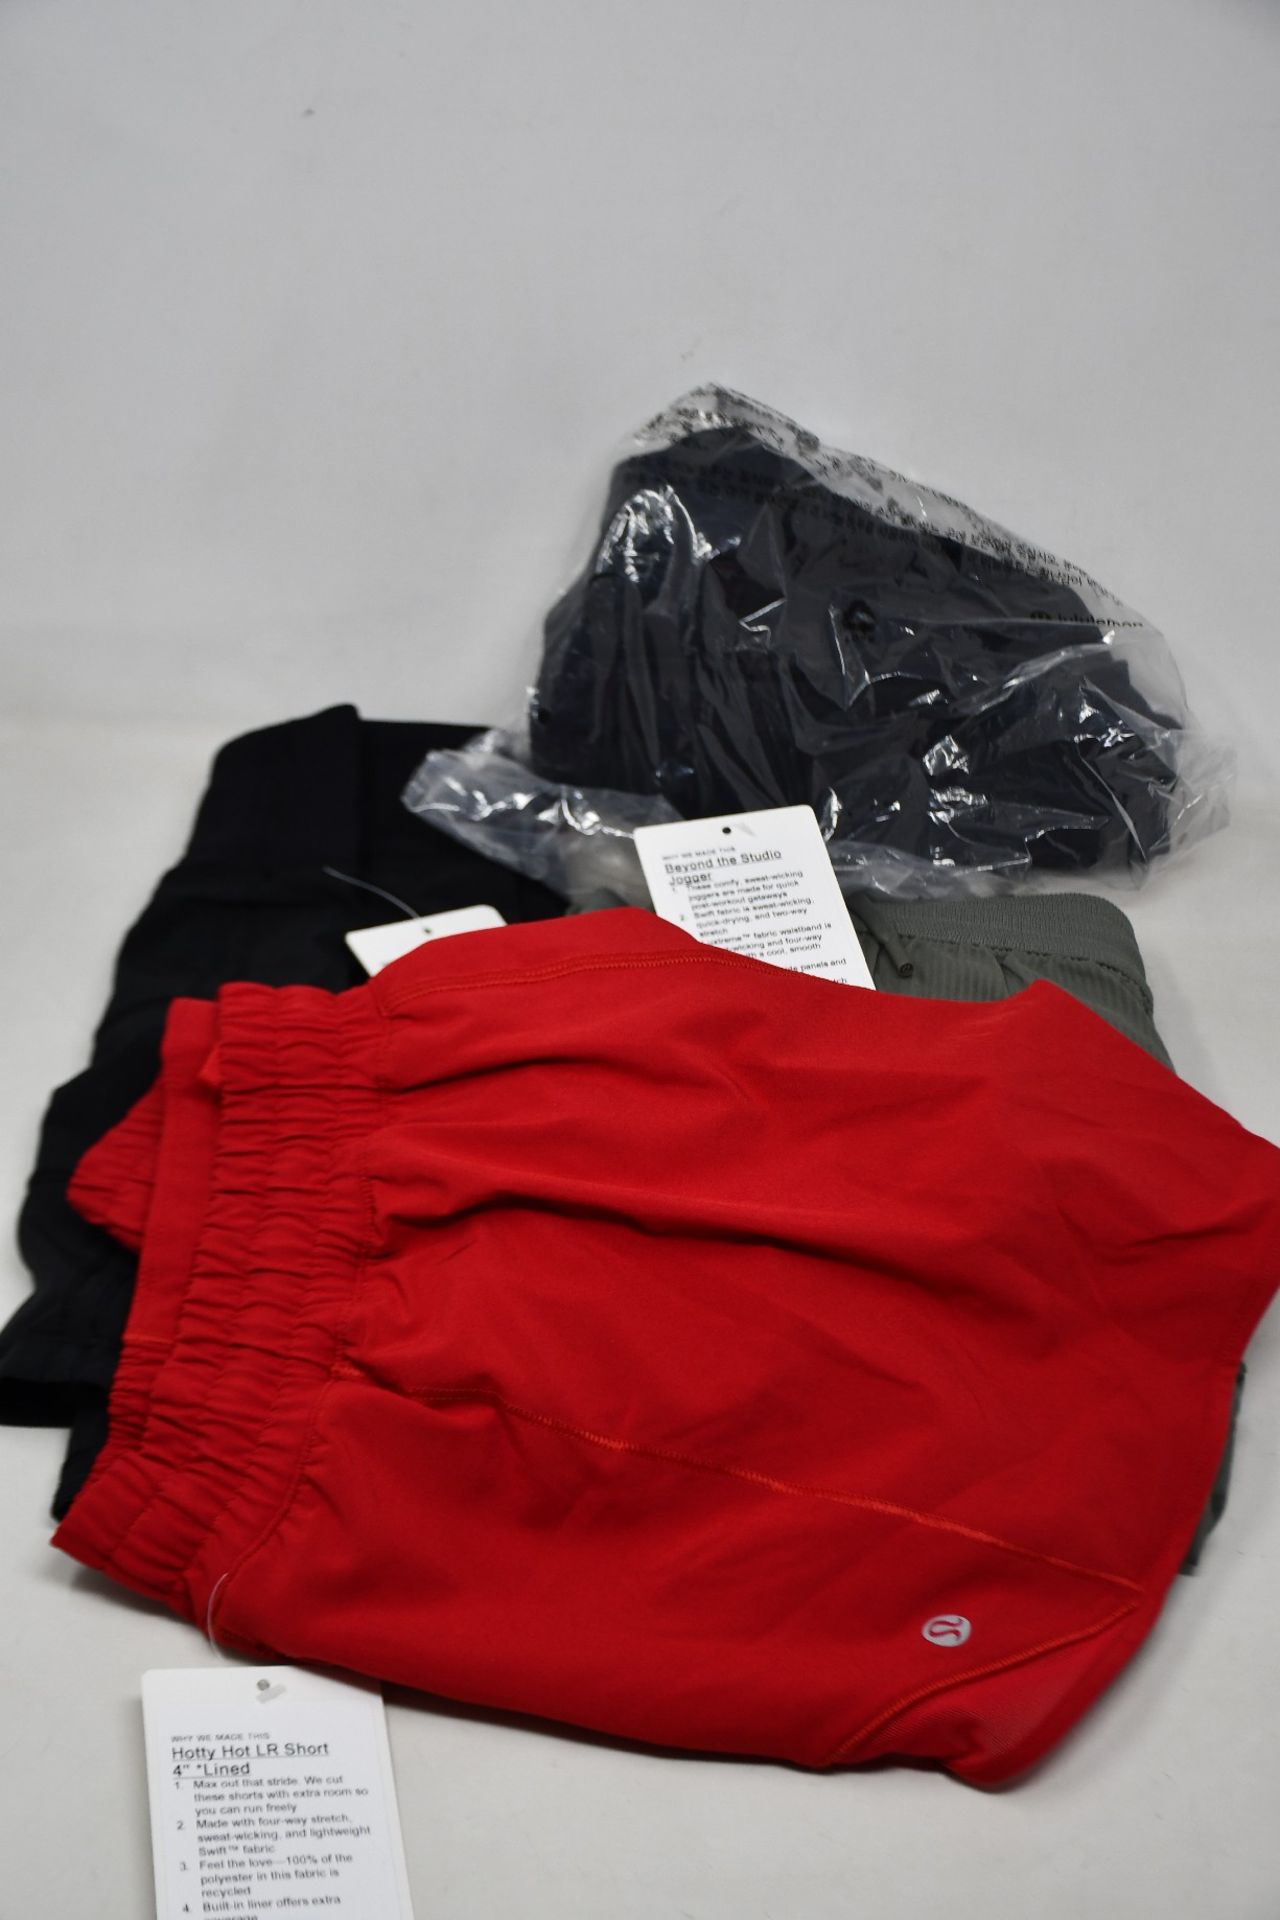 Four items of as new LuluLemon fitness wear; Beyond The Studio joggers (Size 8 - RRP £98), Pace